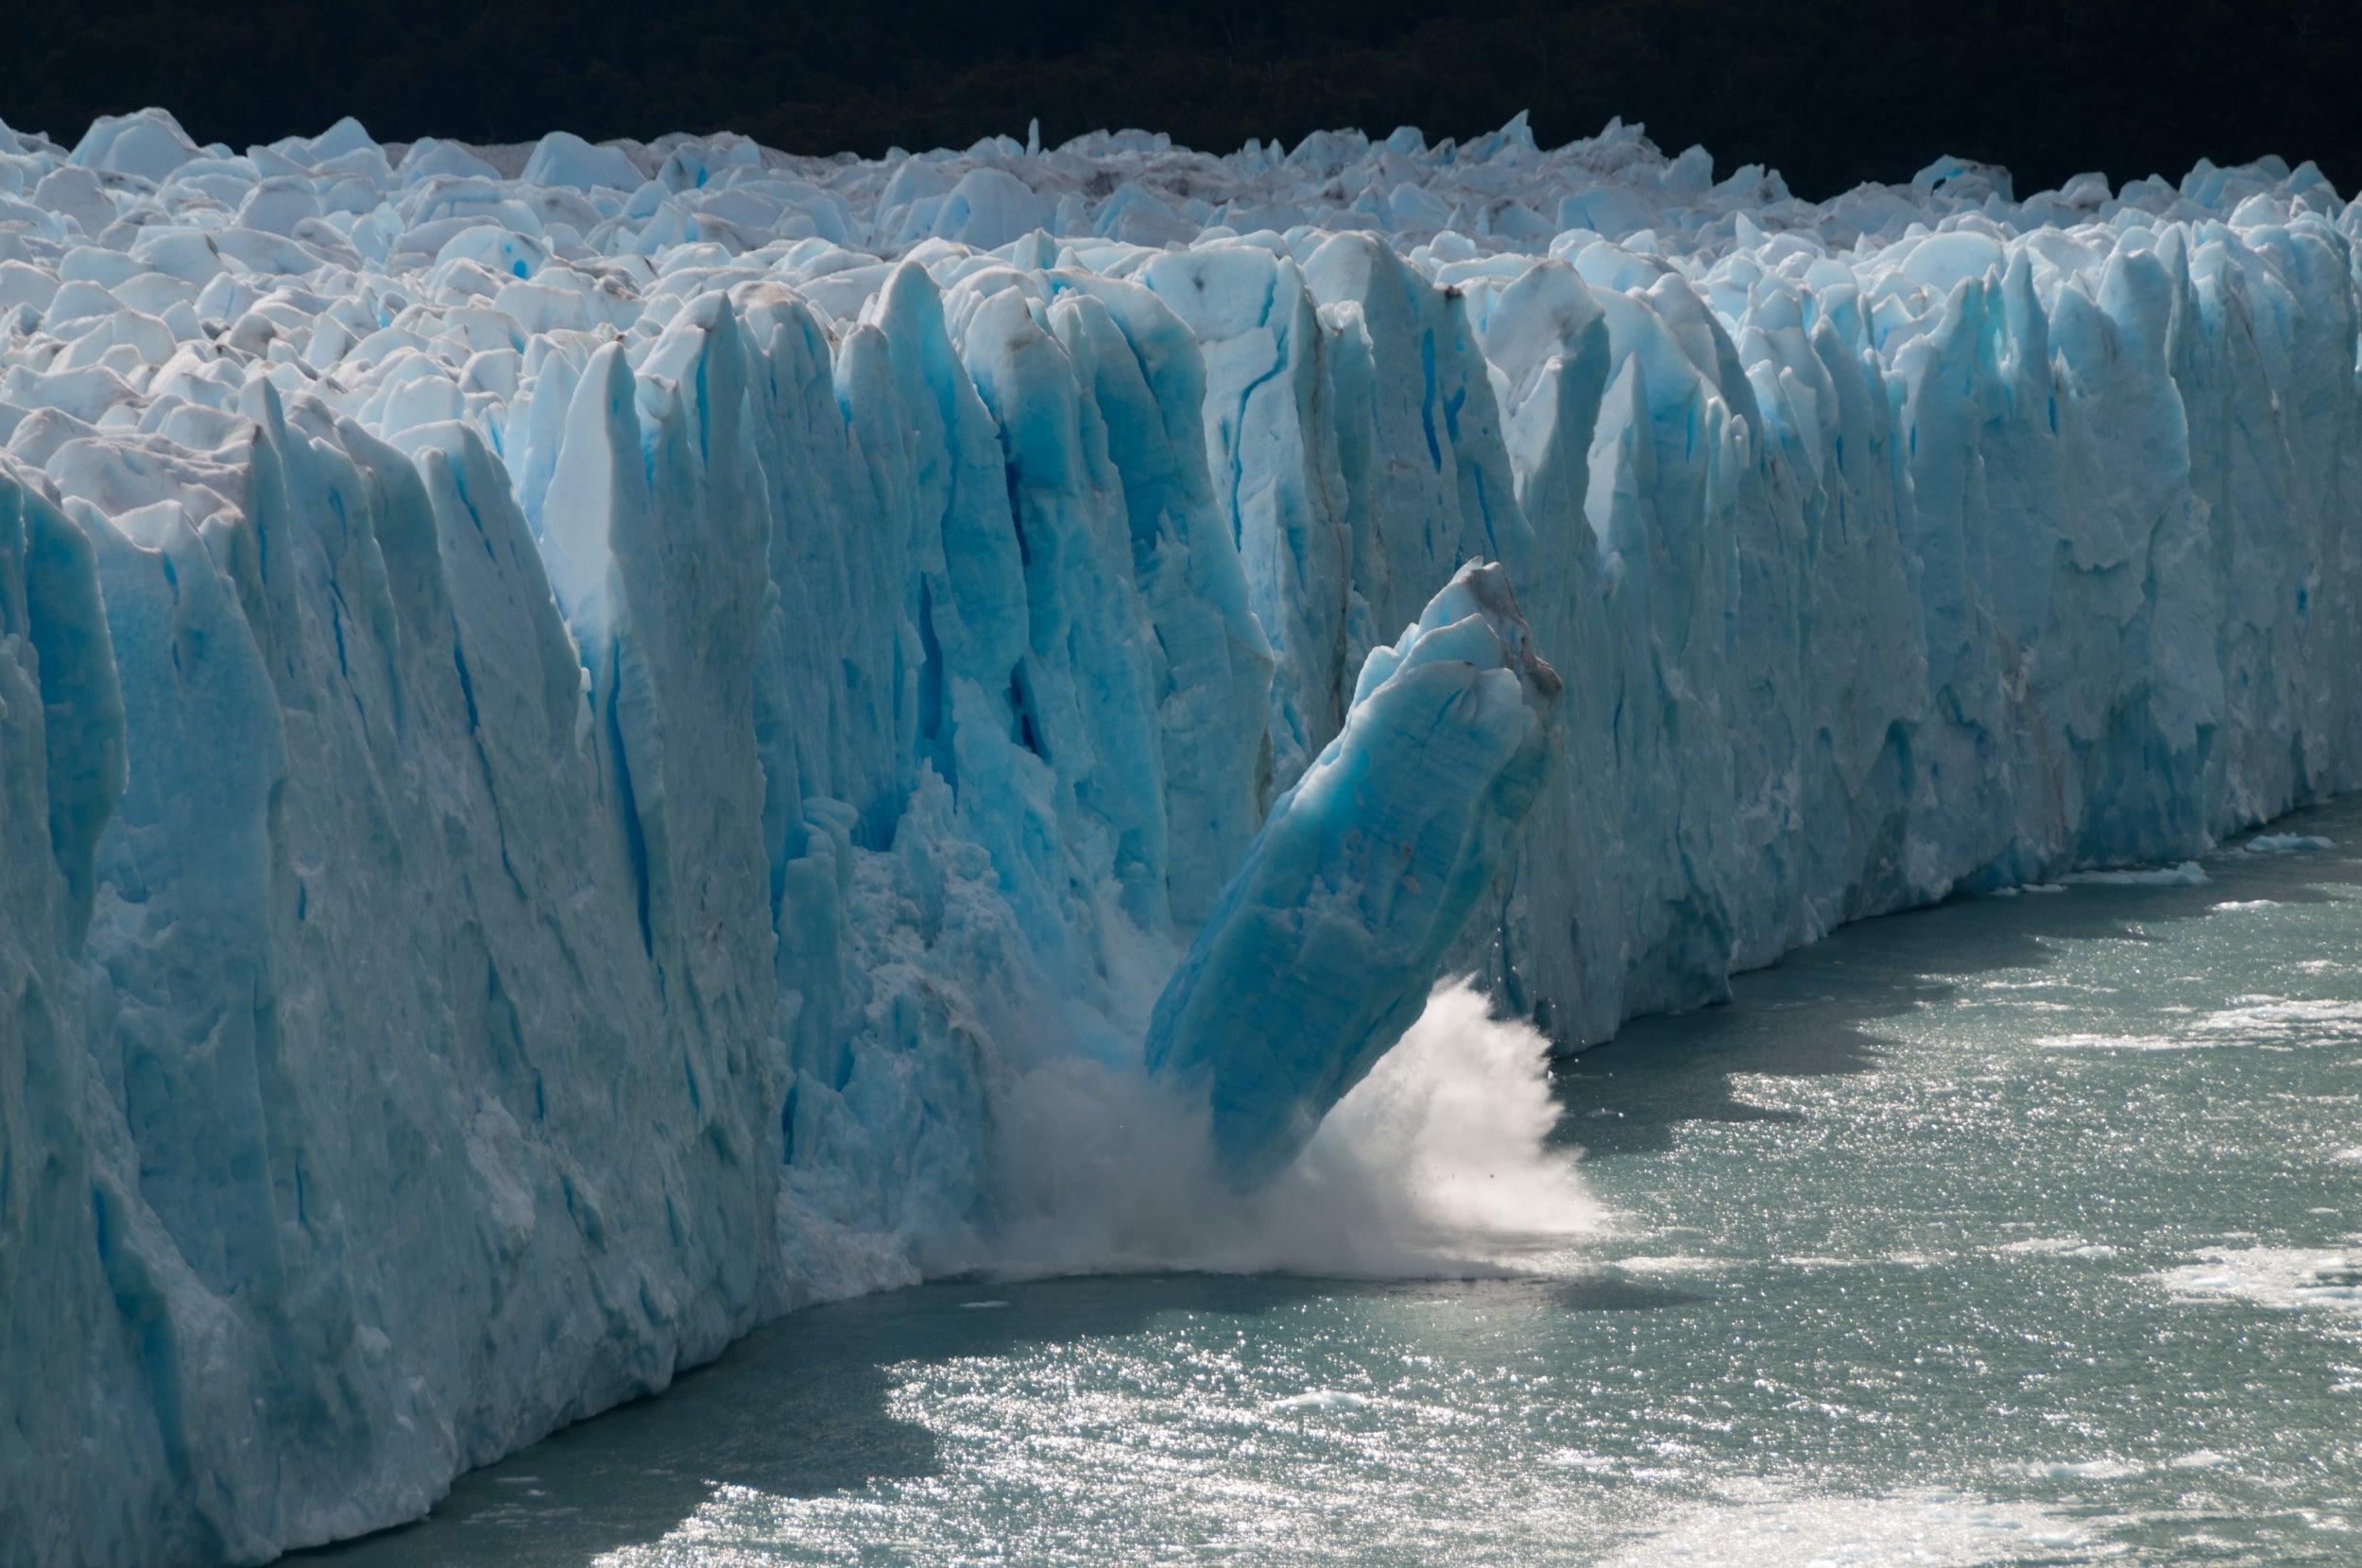 A giant piece of ice breaks off a glacier in Argentina